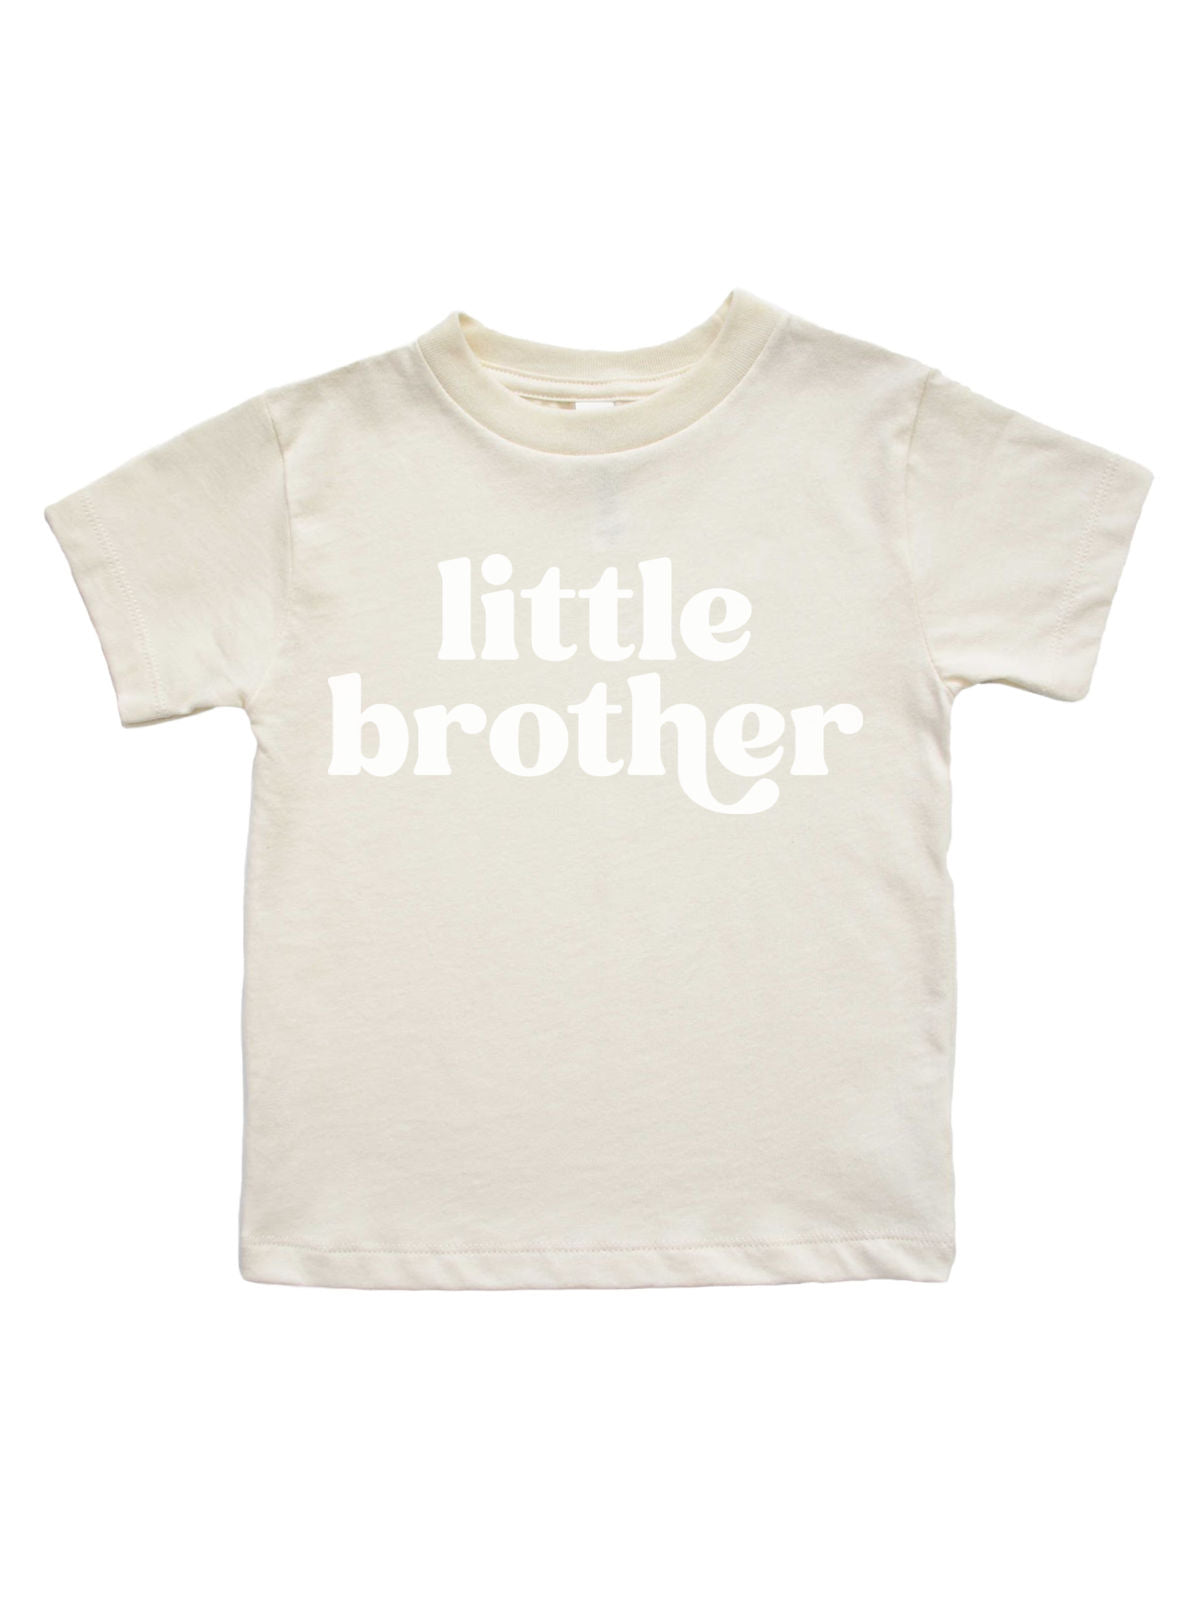 Little Brother Baby Shirt in Natural